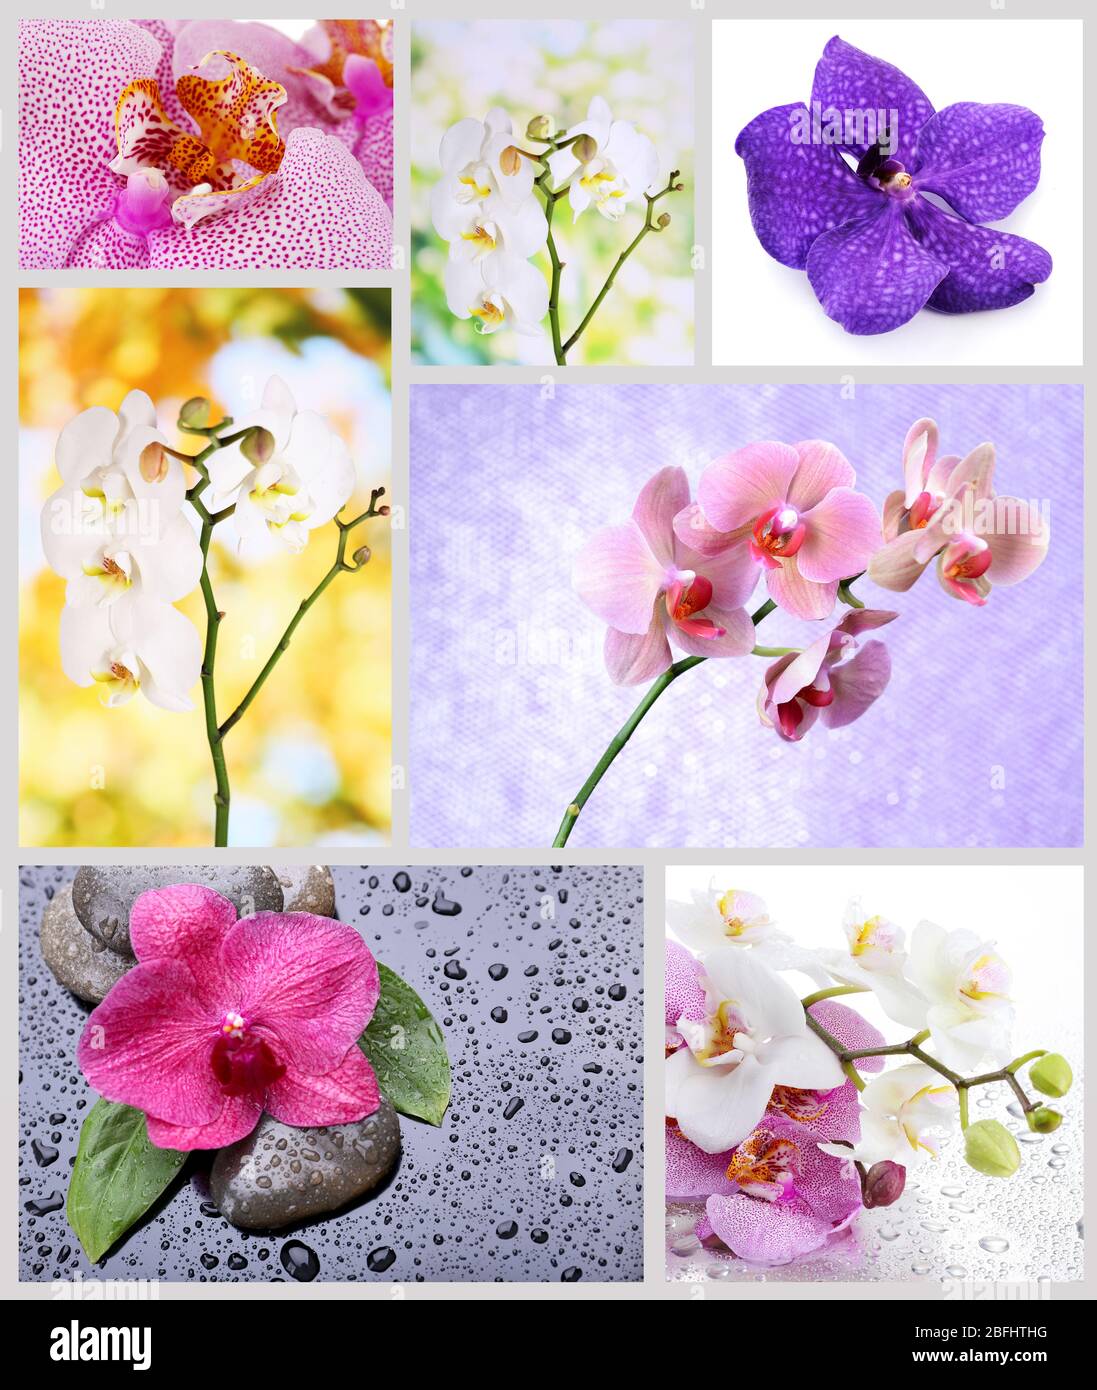 Collage of beautiful orchids Stock Photo